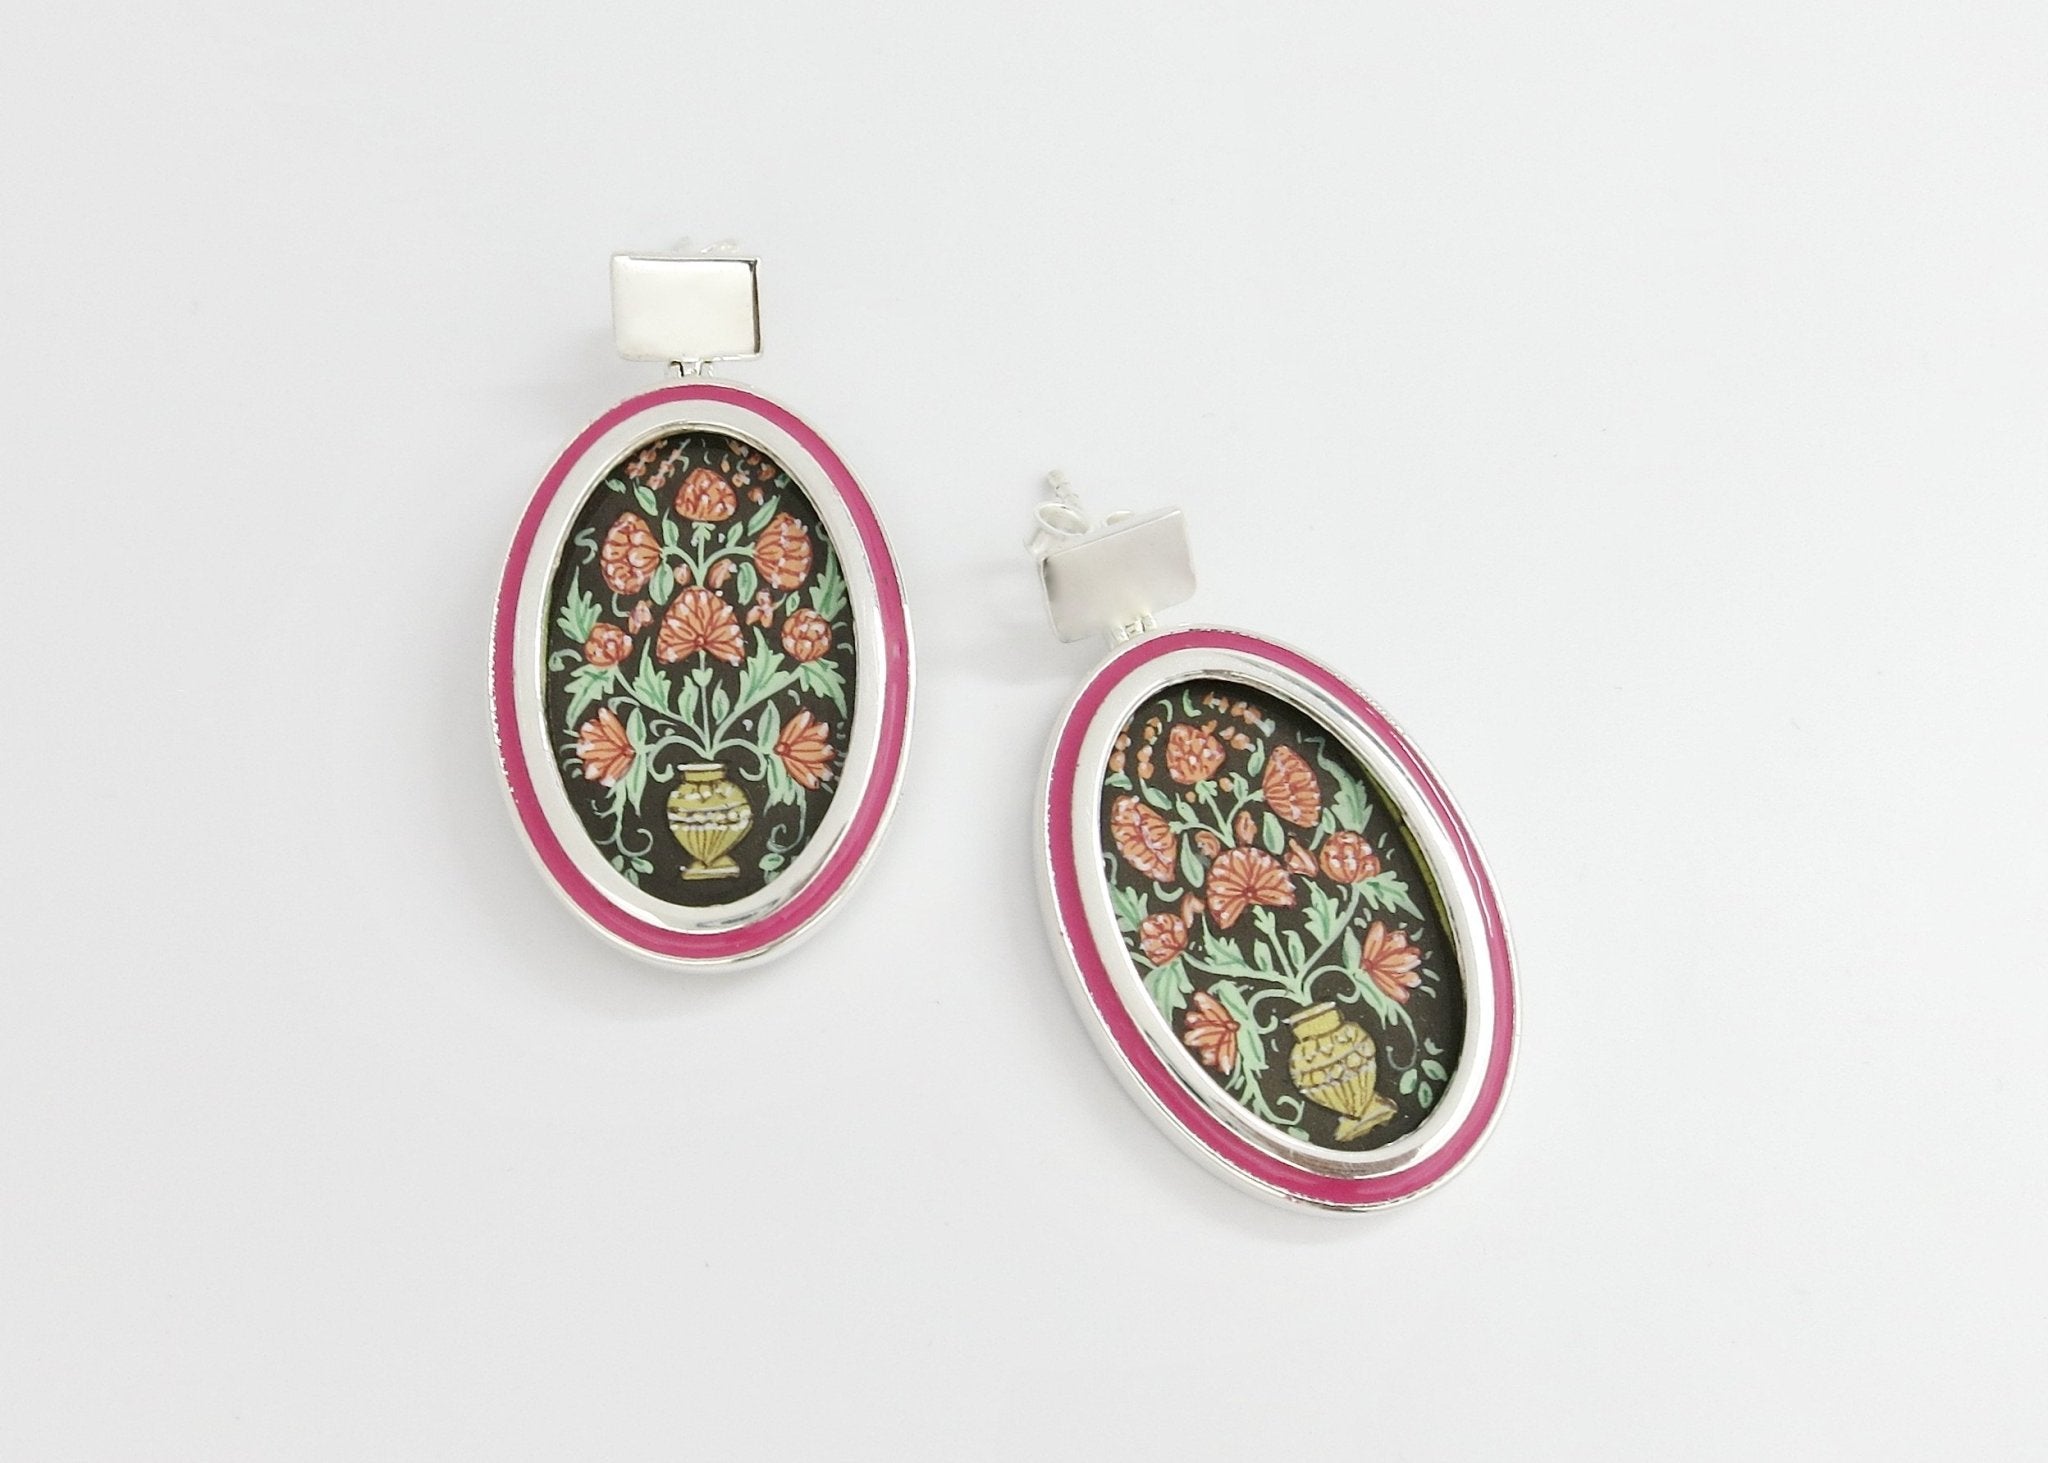 Luxurious, and chic, Mughal 'guldan' (vase) oval earrings - Lai